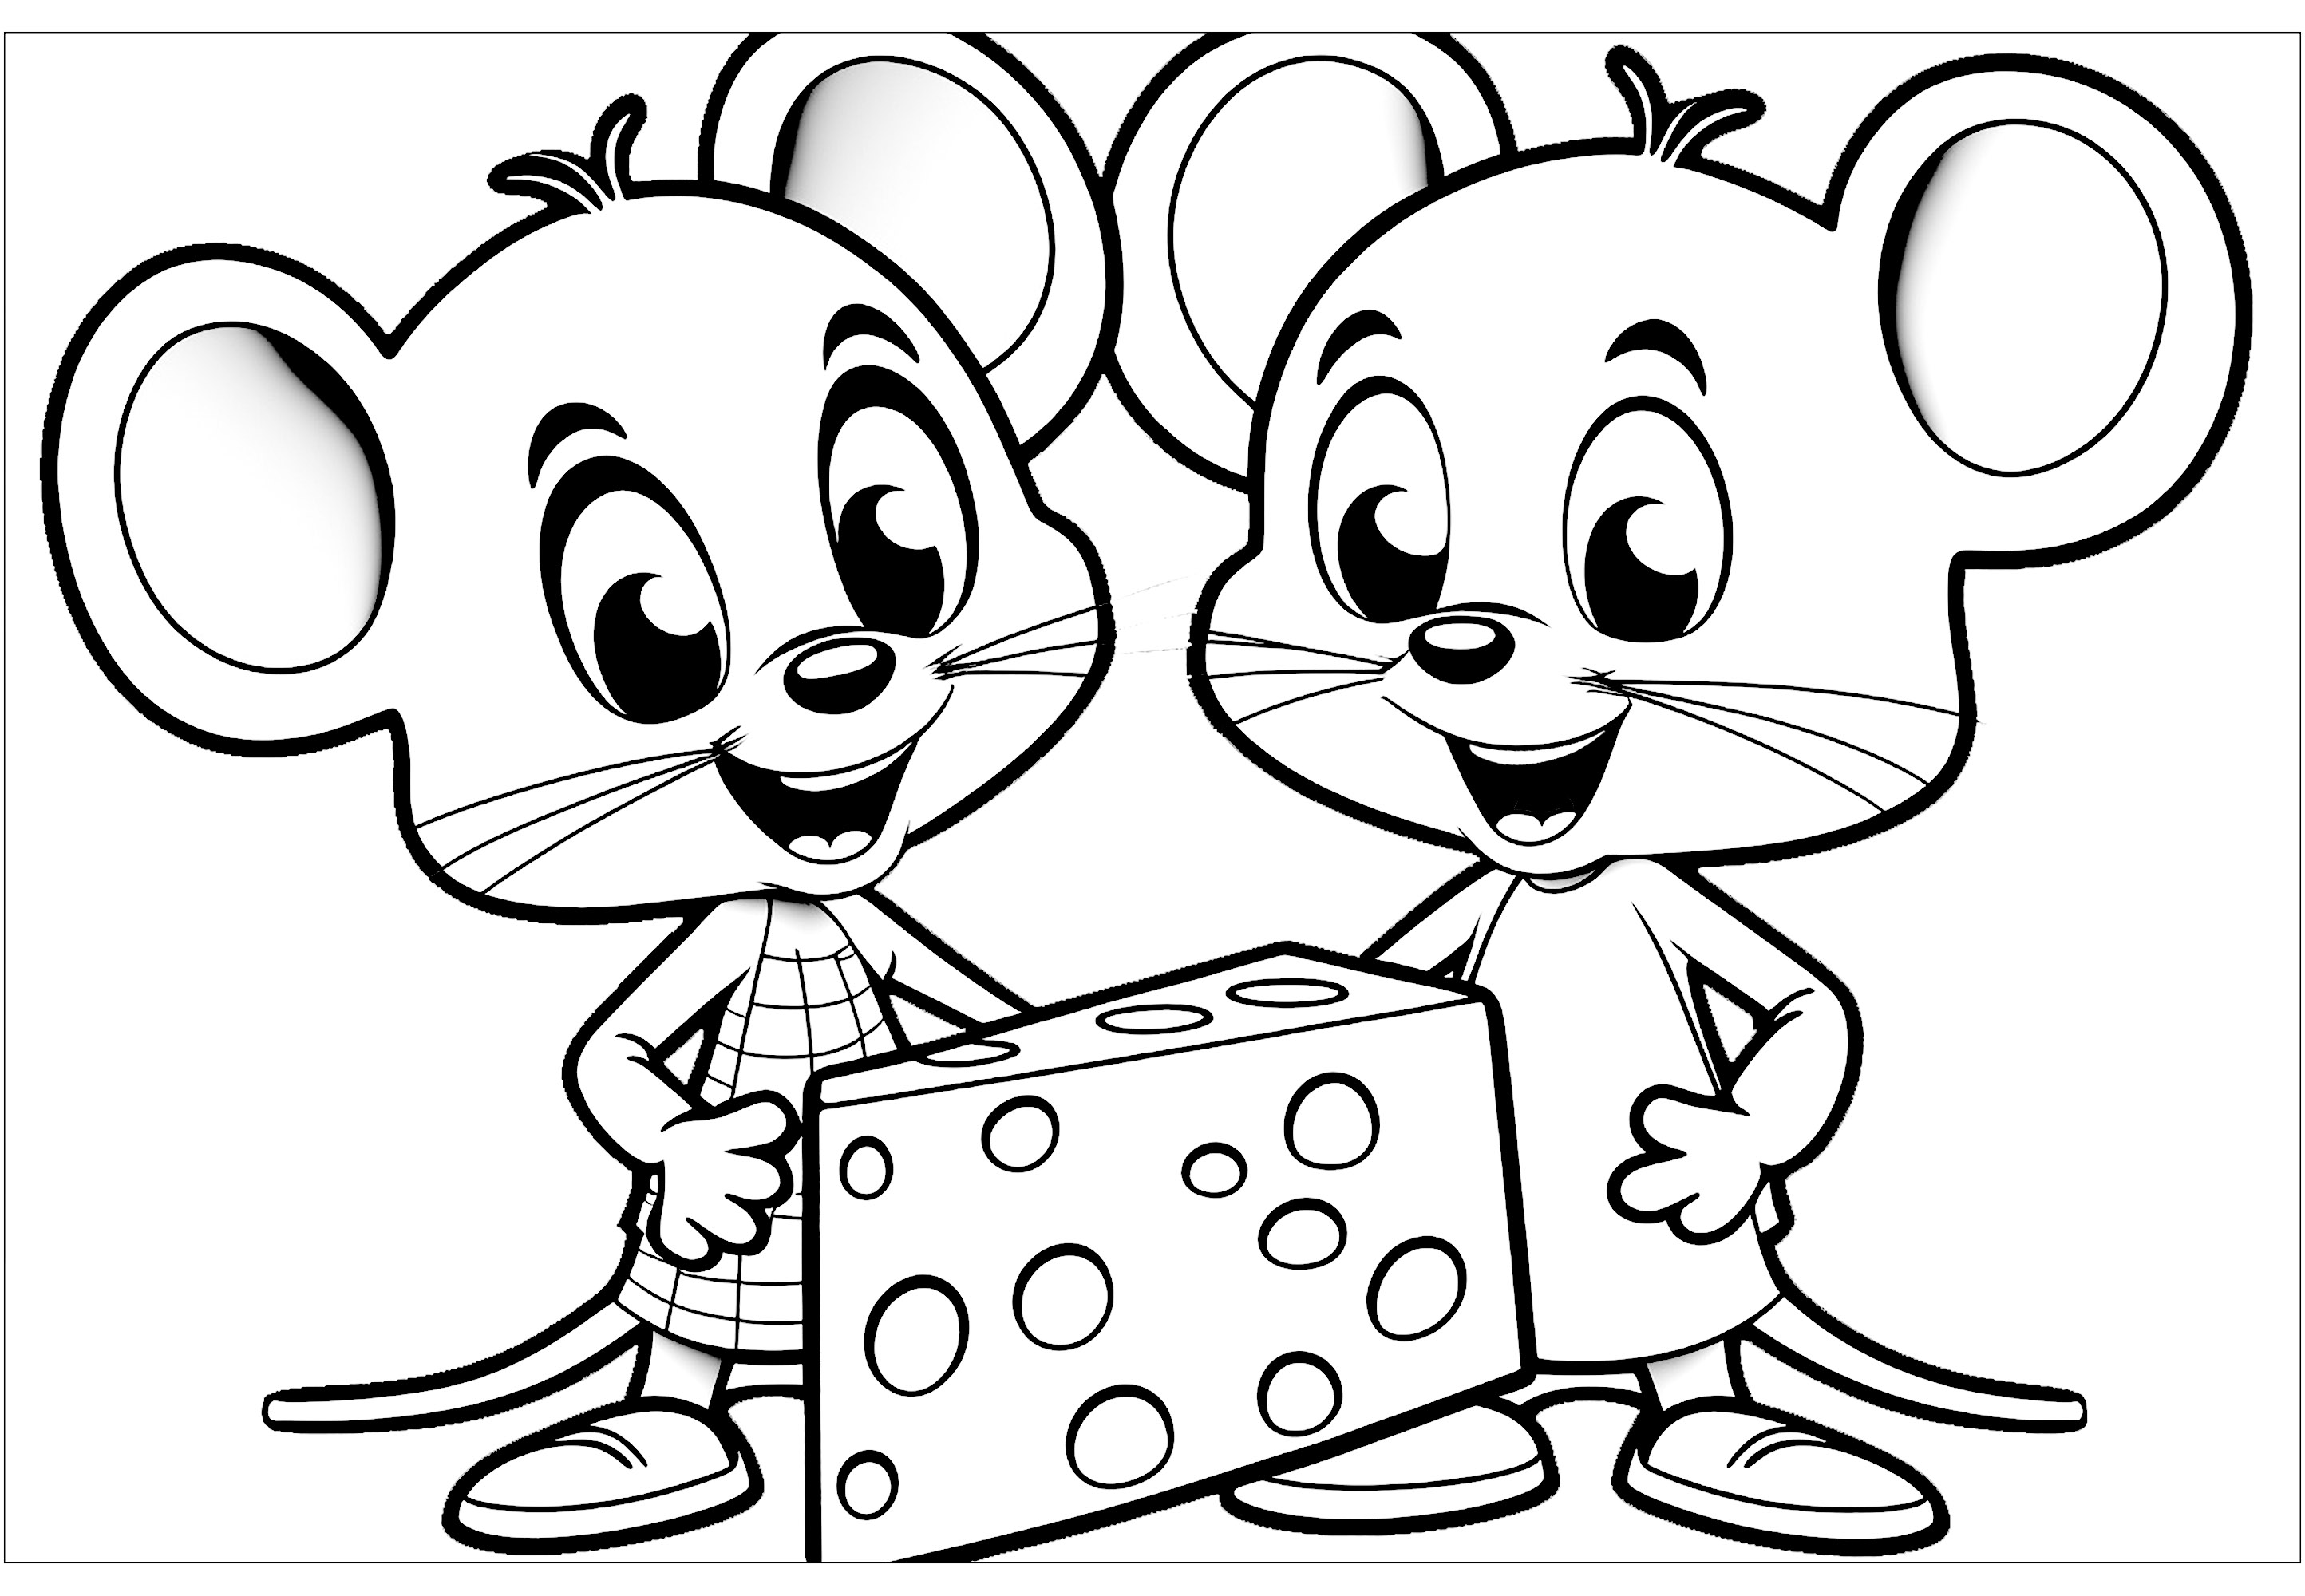 Coloring of two mischievous mice ready to eat a big piece of cheese. Which mouse is going to start eating this cheese? It looks delicious